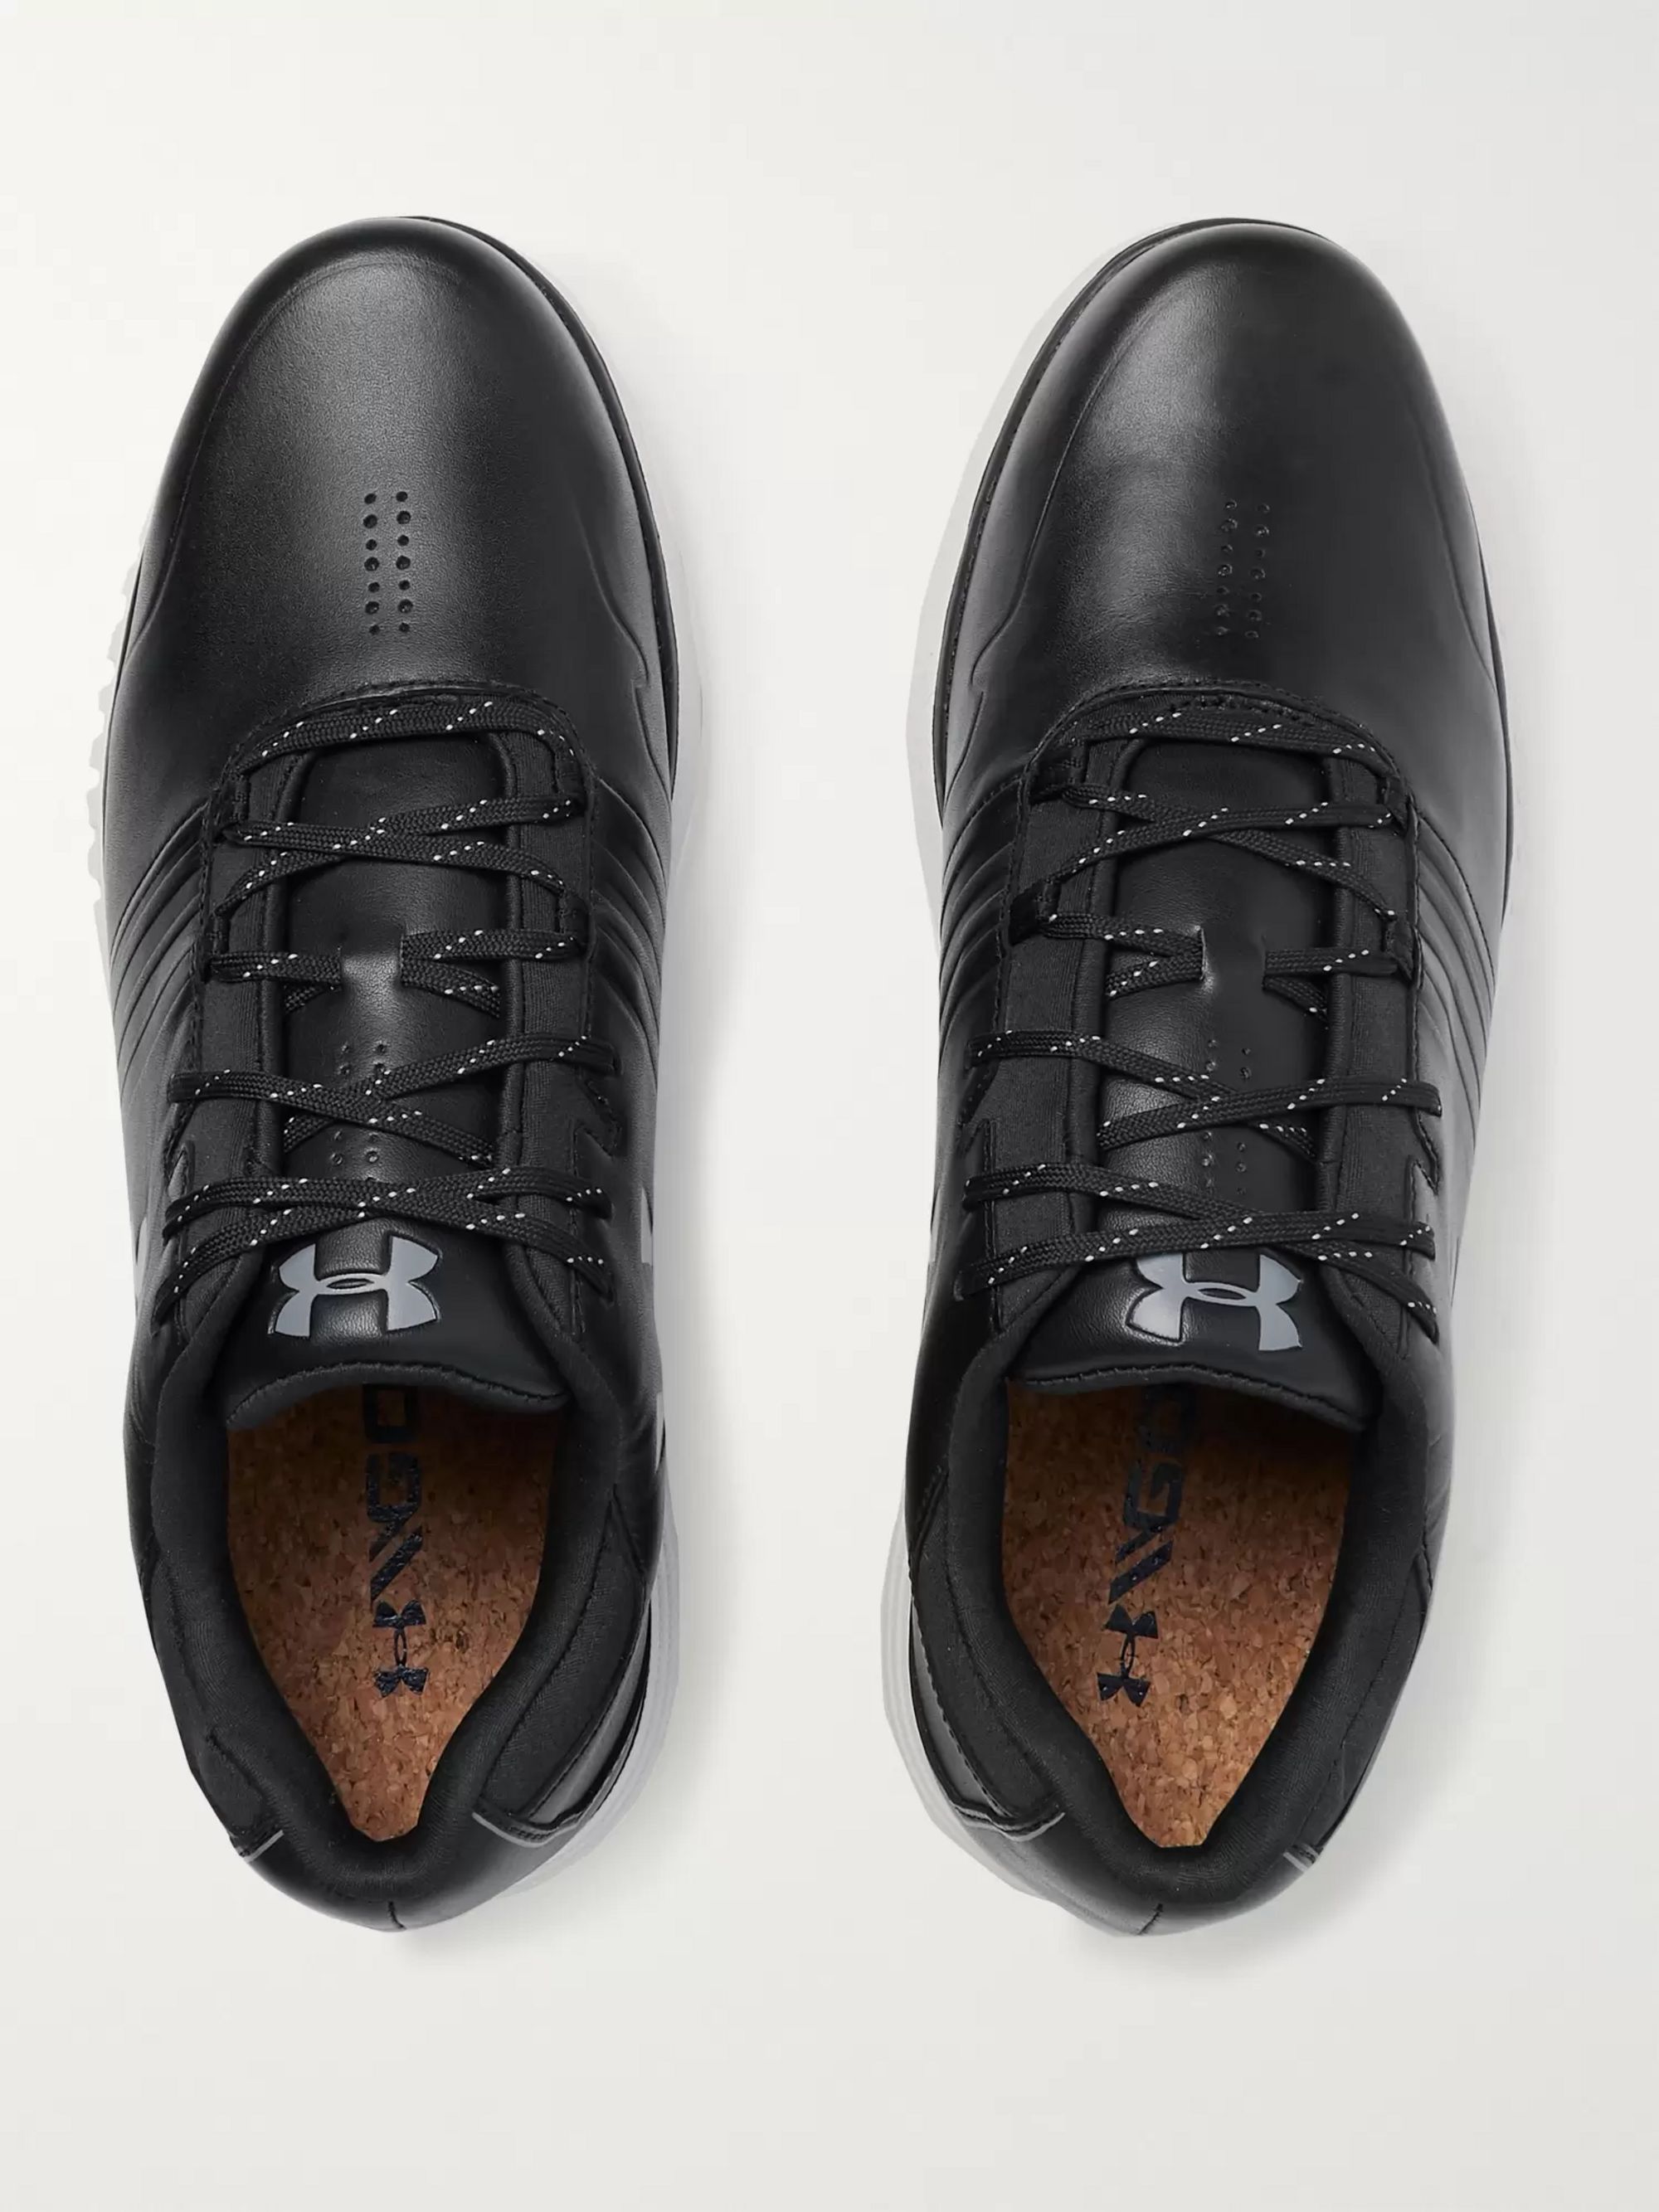 under armour black leather shoes